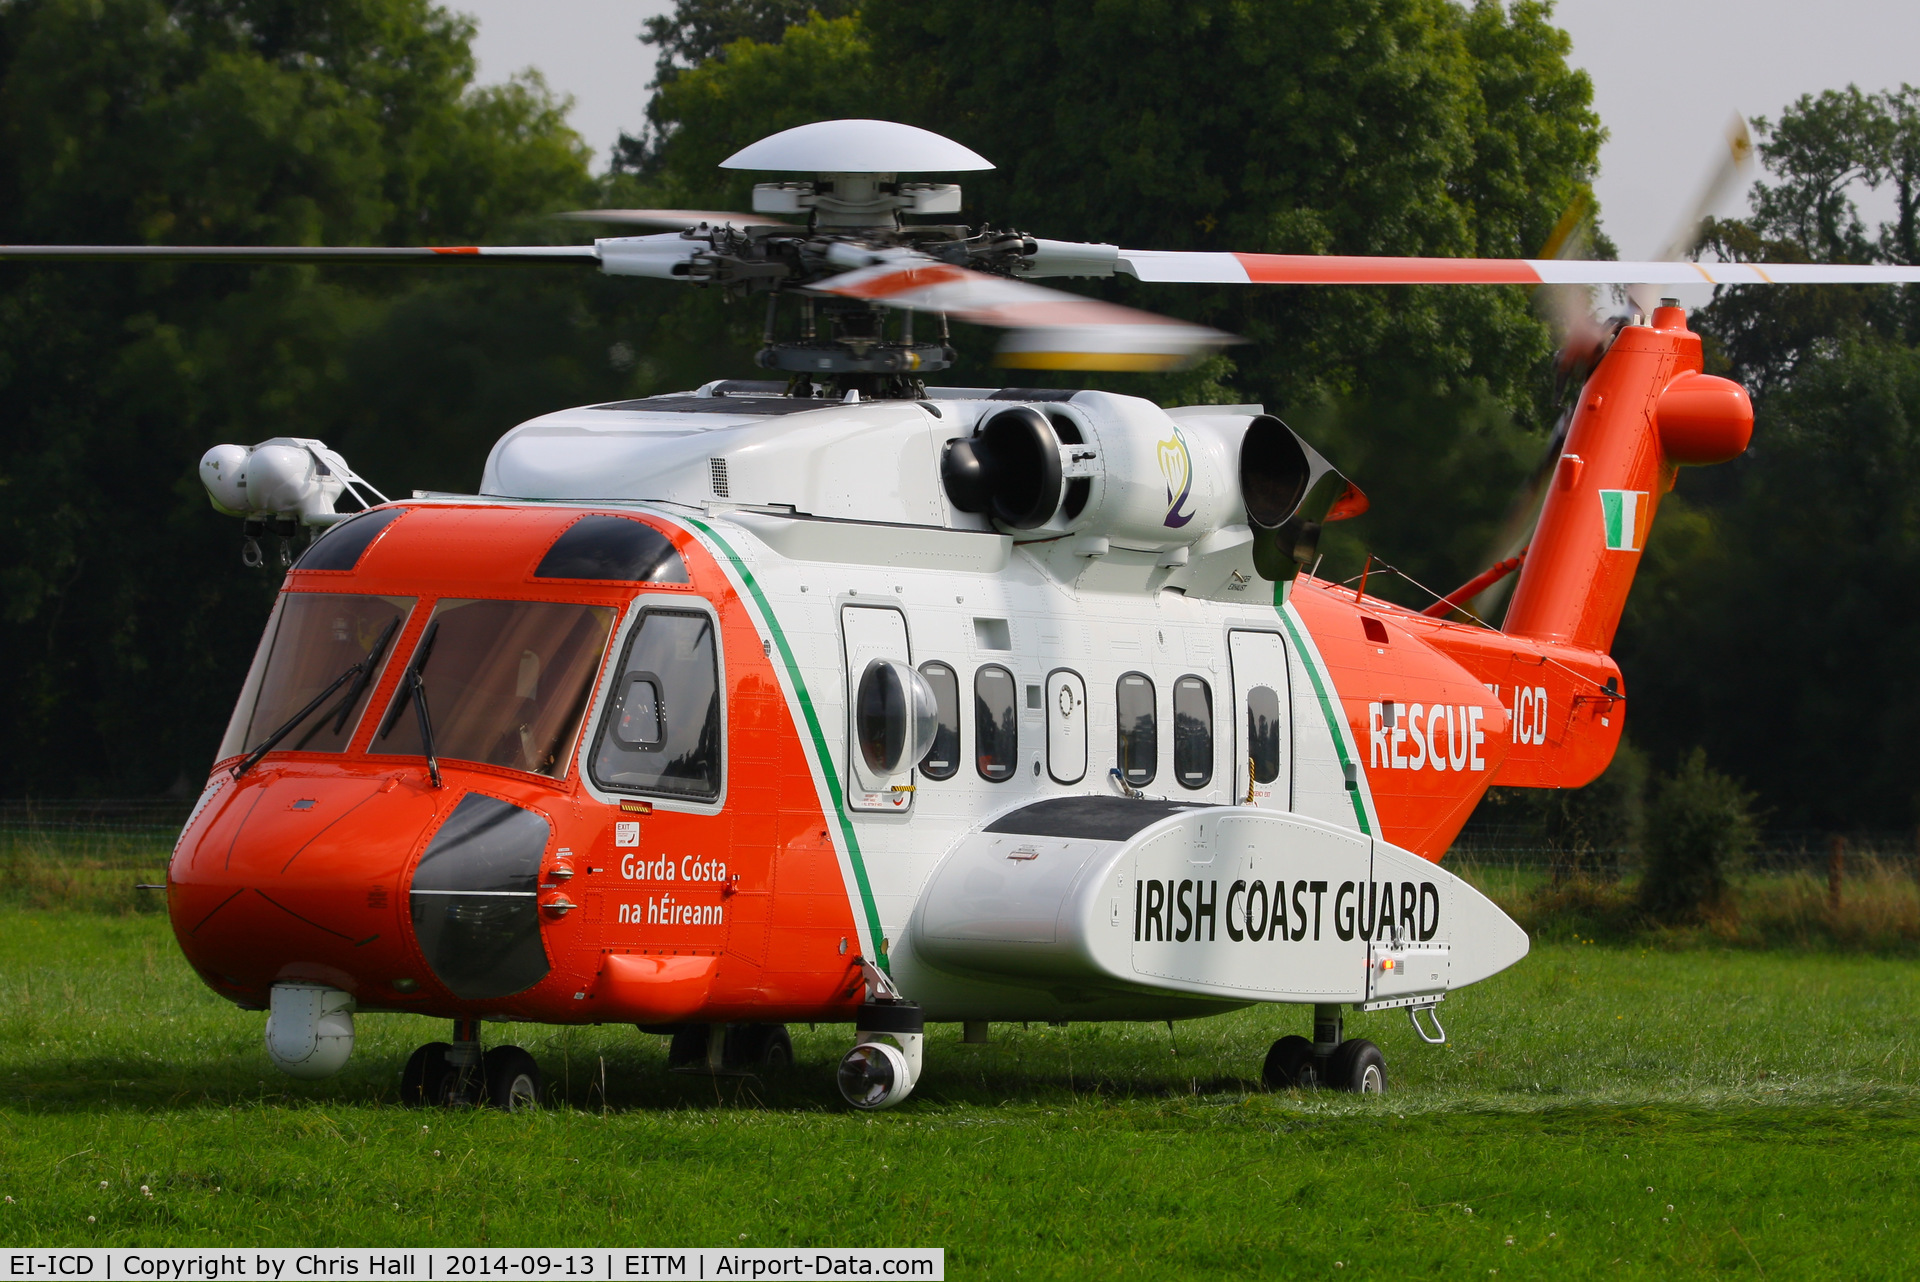 EI-ICD, 2007 Sikorsky S-92A C/N 920052, at the Trim airfield fly in, County Meath, Ireland